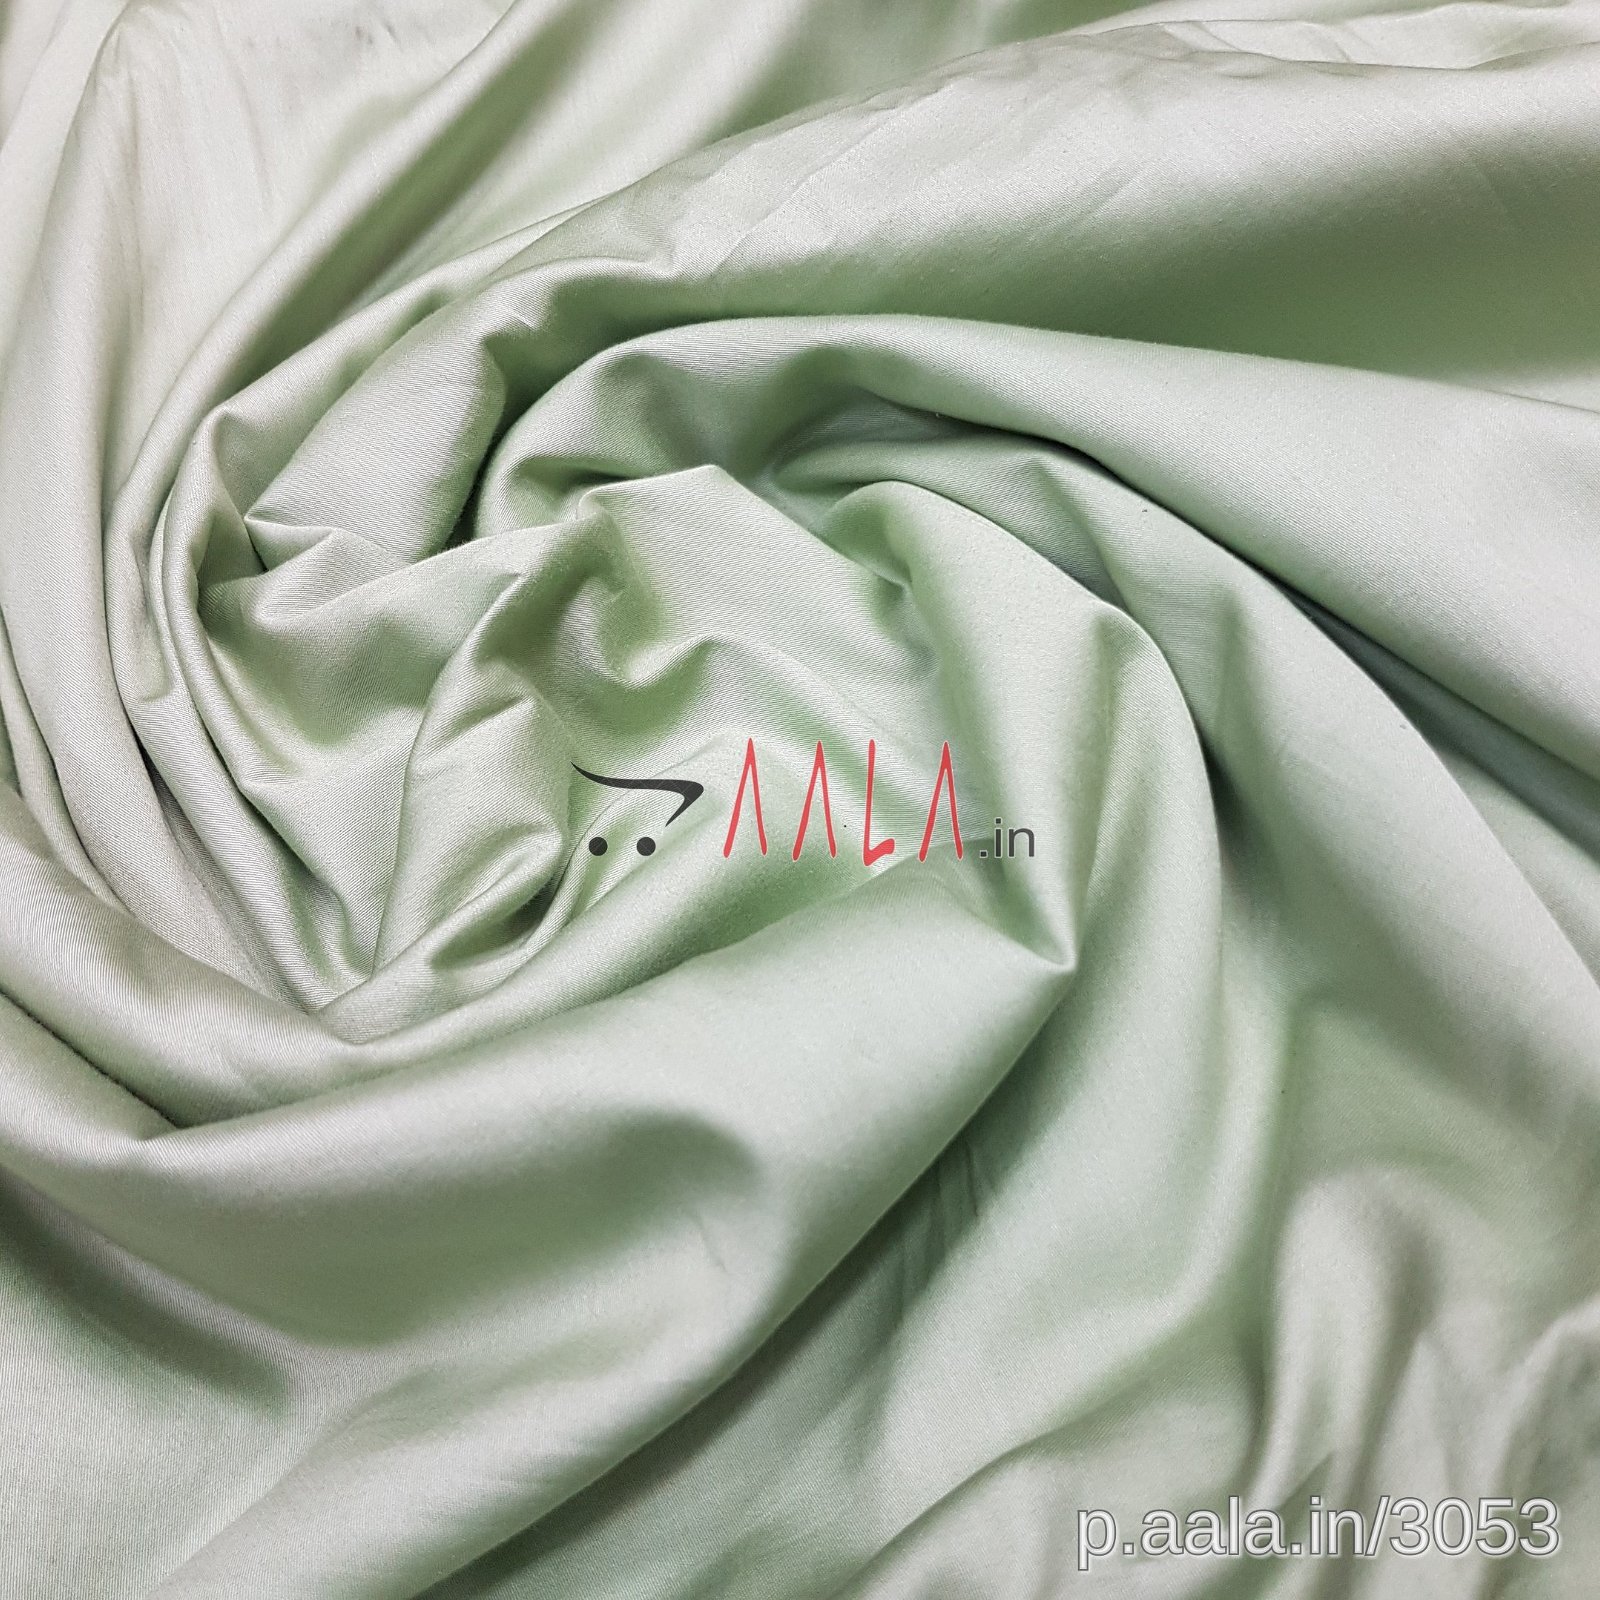 Satin Cotton 44 Inches Dyed Per Metre #3053